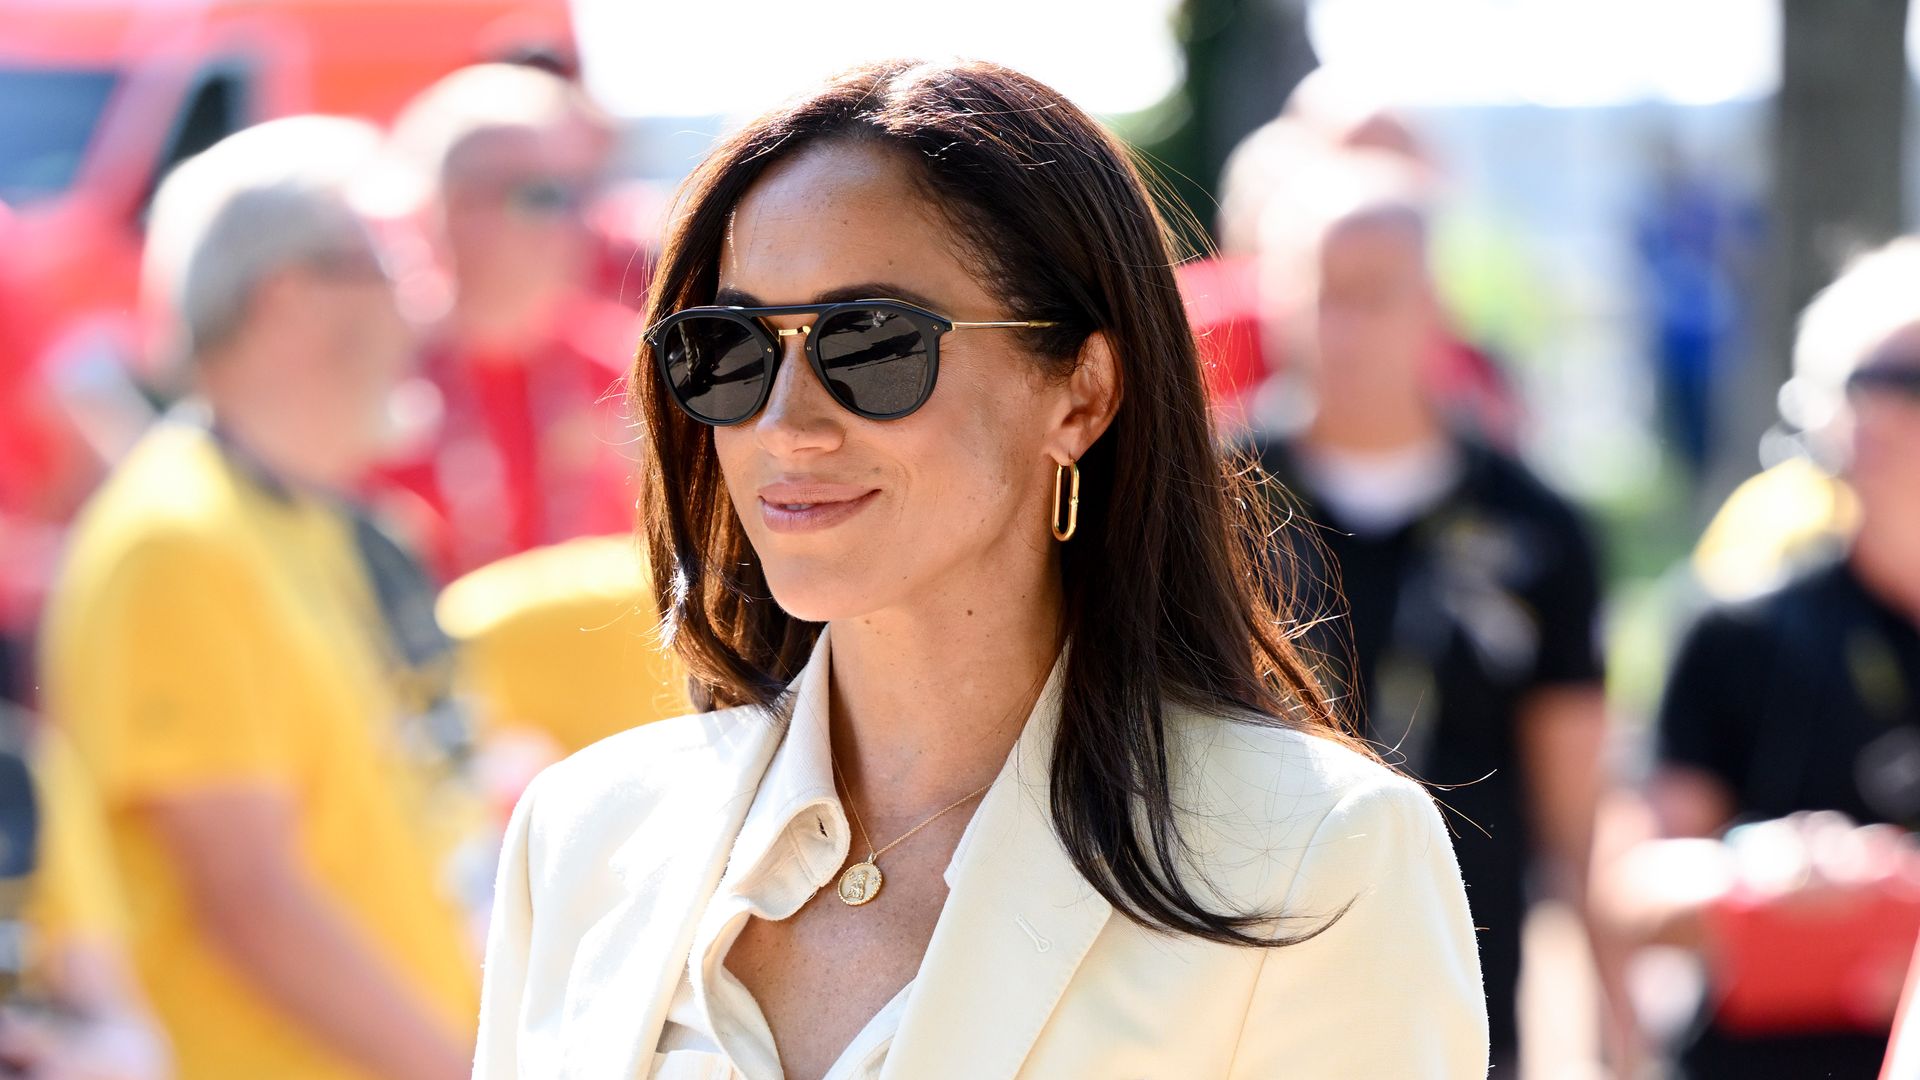 Meghan Markle wearing cream coord and sunglasses at Invictus Games 2023